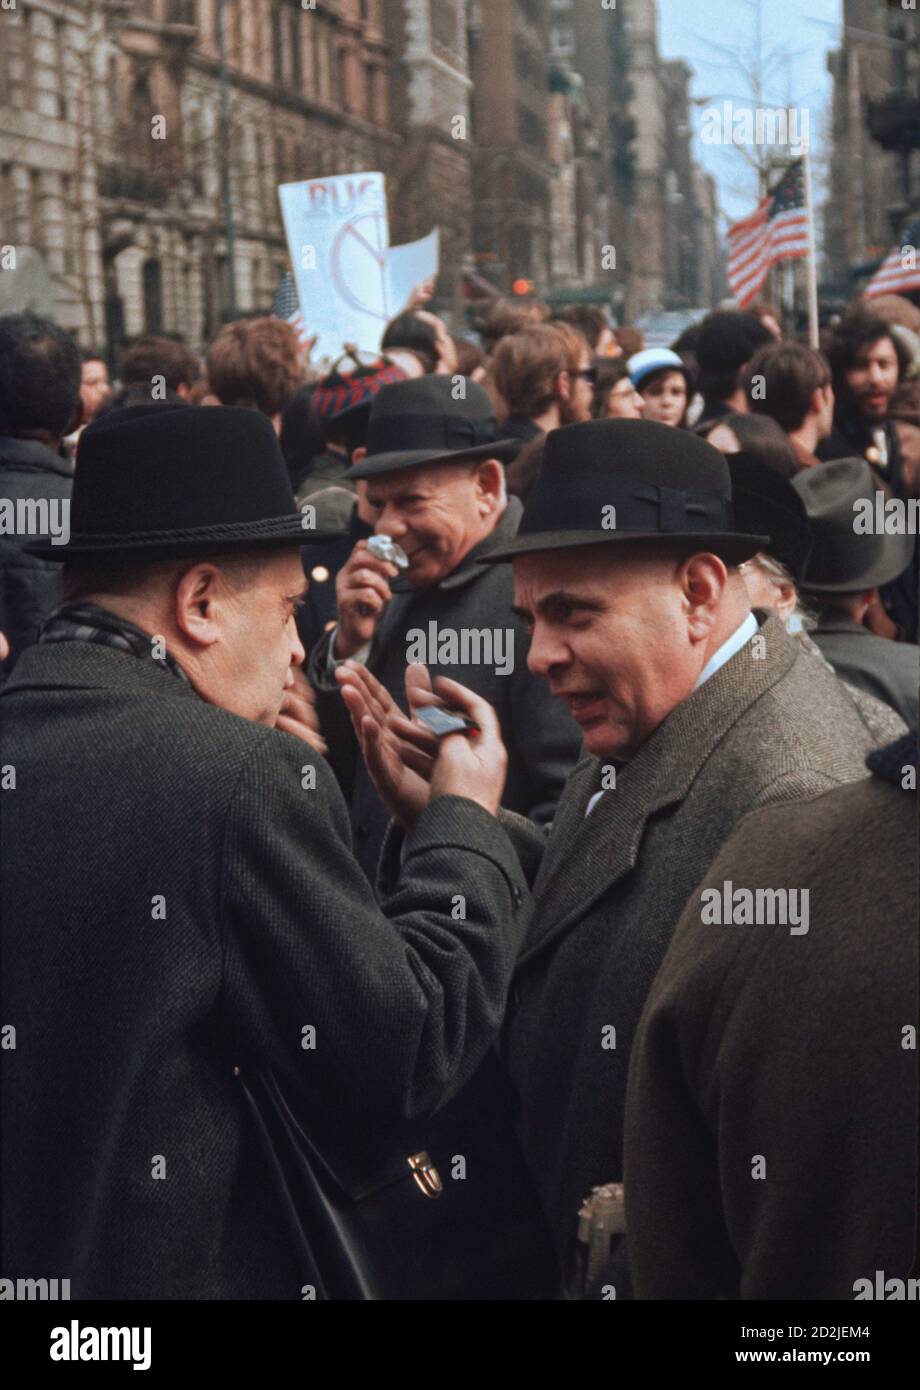 Discussion around Anti-War Protest March on Fifth Avenue in New York City March 26, 1966 with two men exchange opinions. Stock Photo